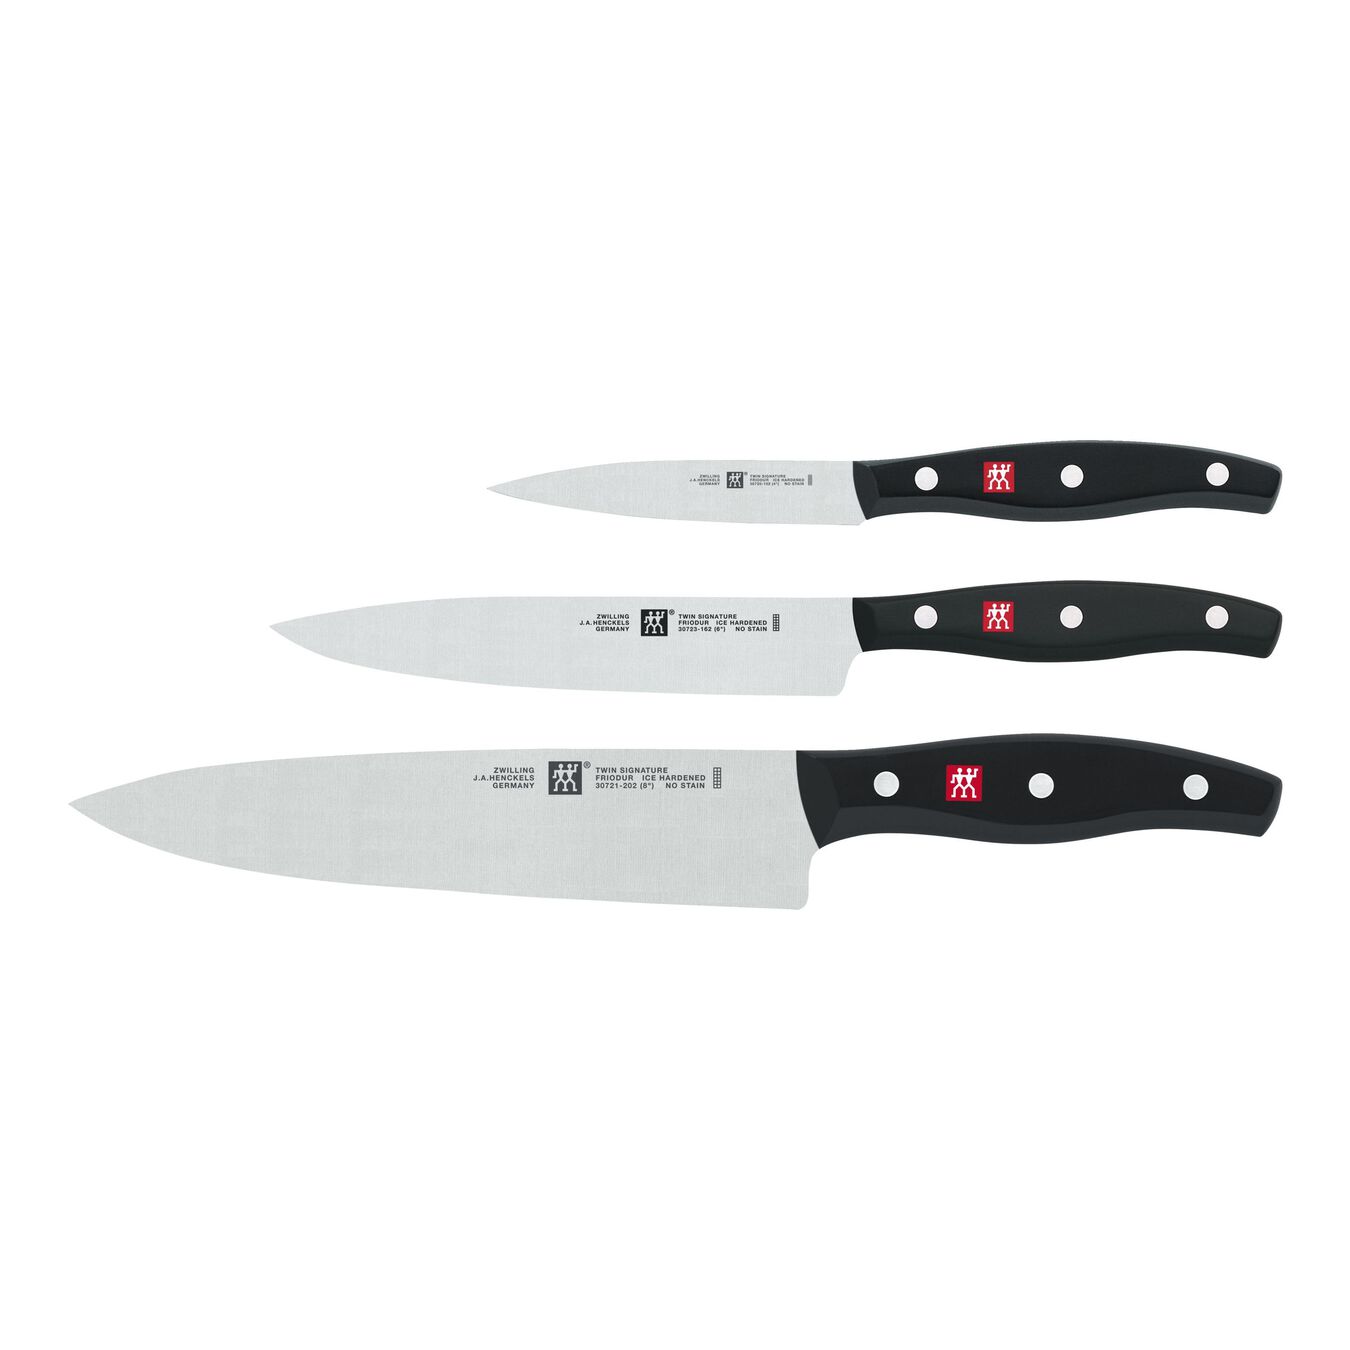 https://www.momjunction.com/wp-content/uploads/product-images/zwilling-twin-signature-three-piece-kitchen-knife-set_afl450.jpg